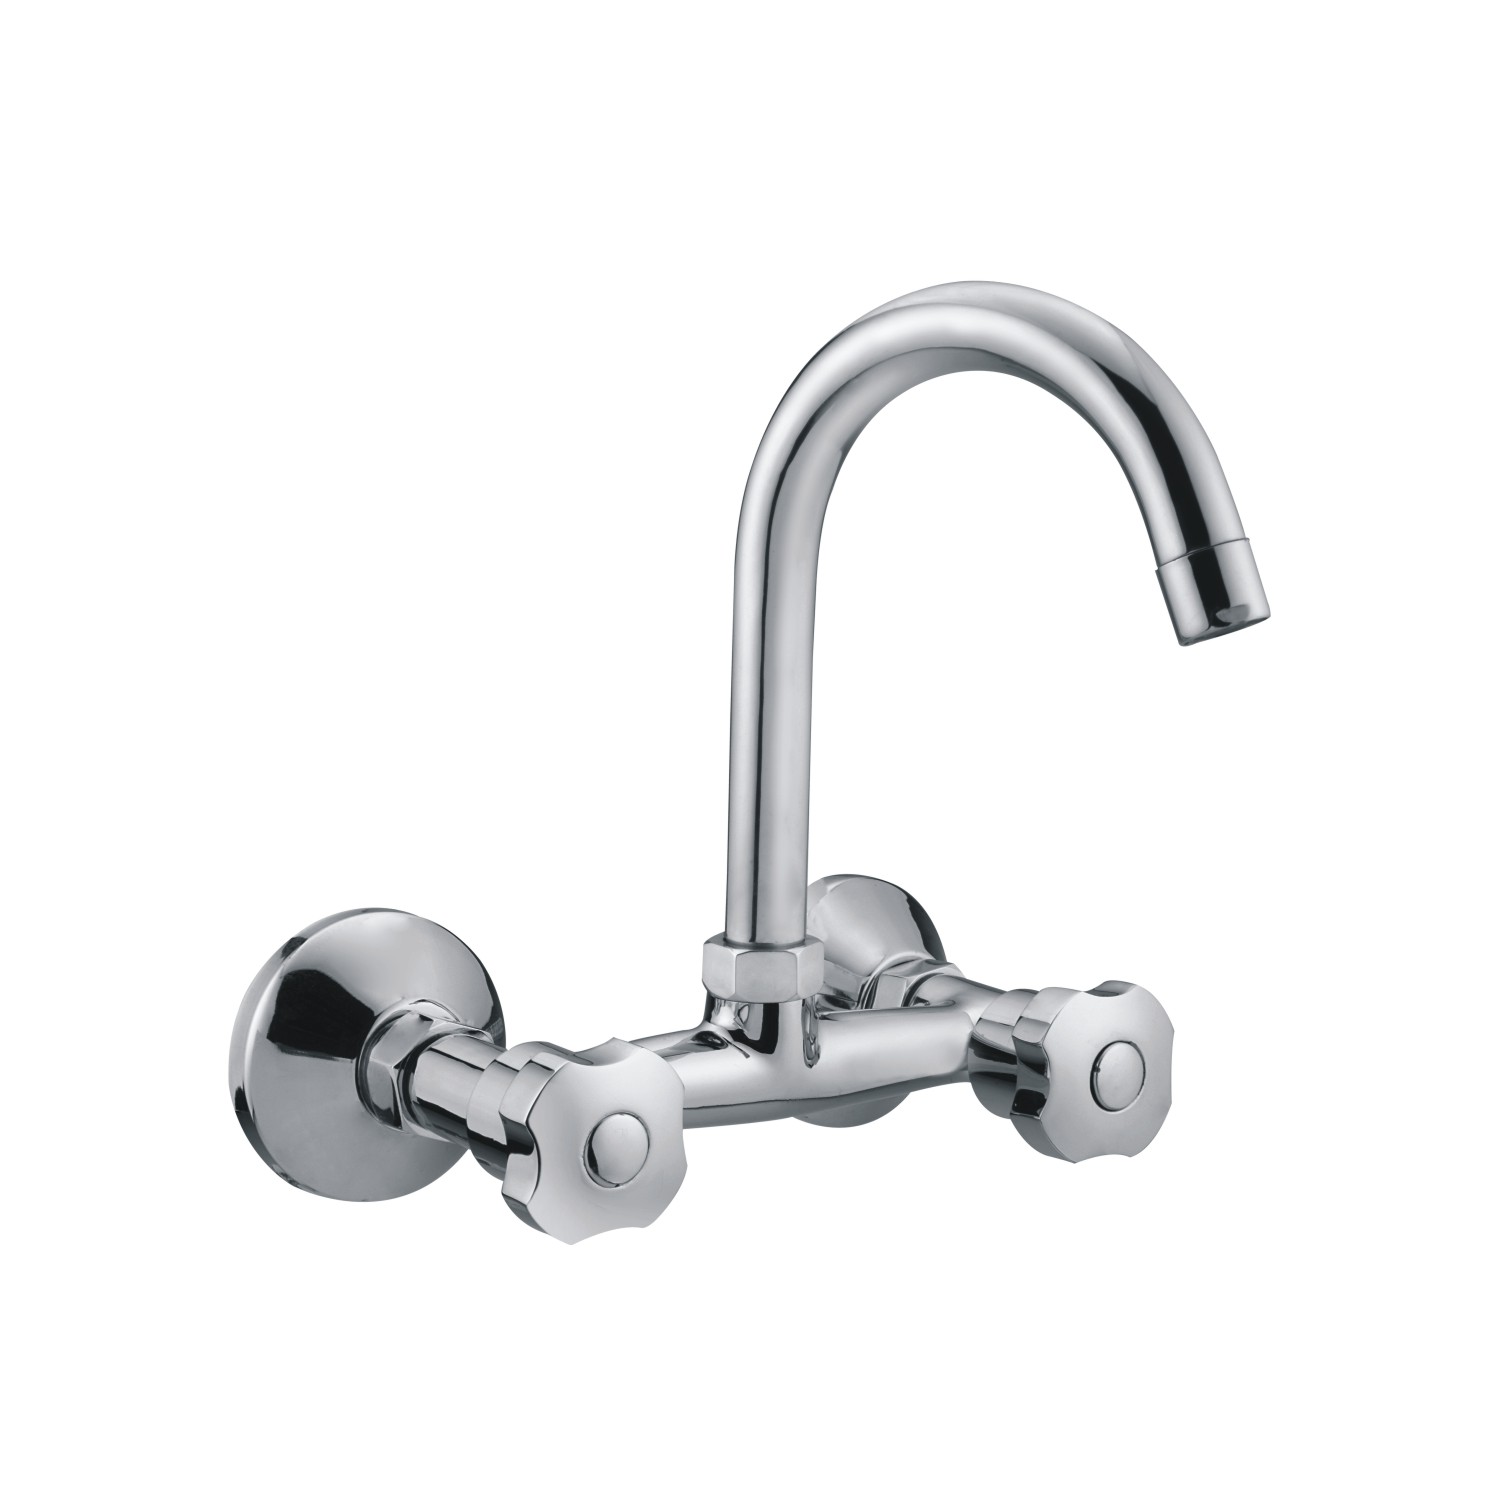 Valura Sink Mixer with Swivel Pipe Spout